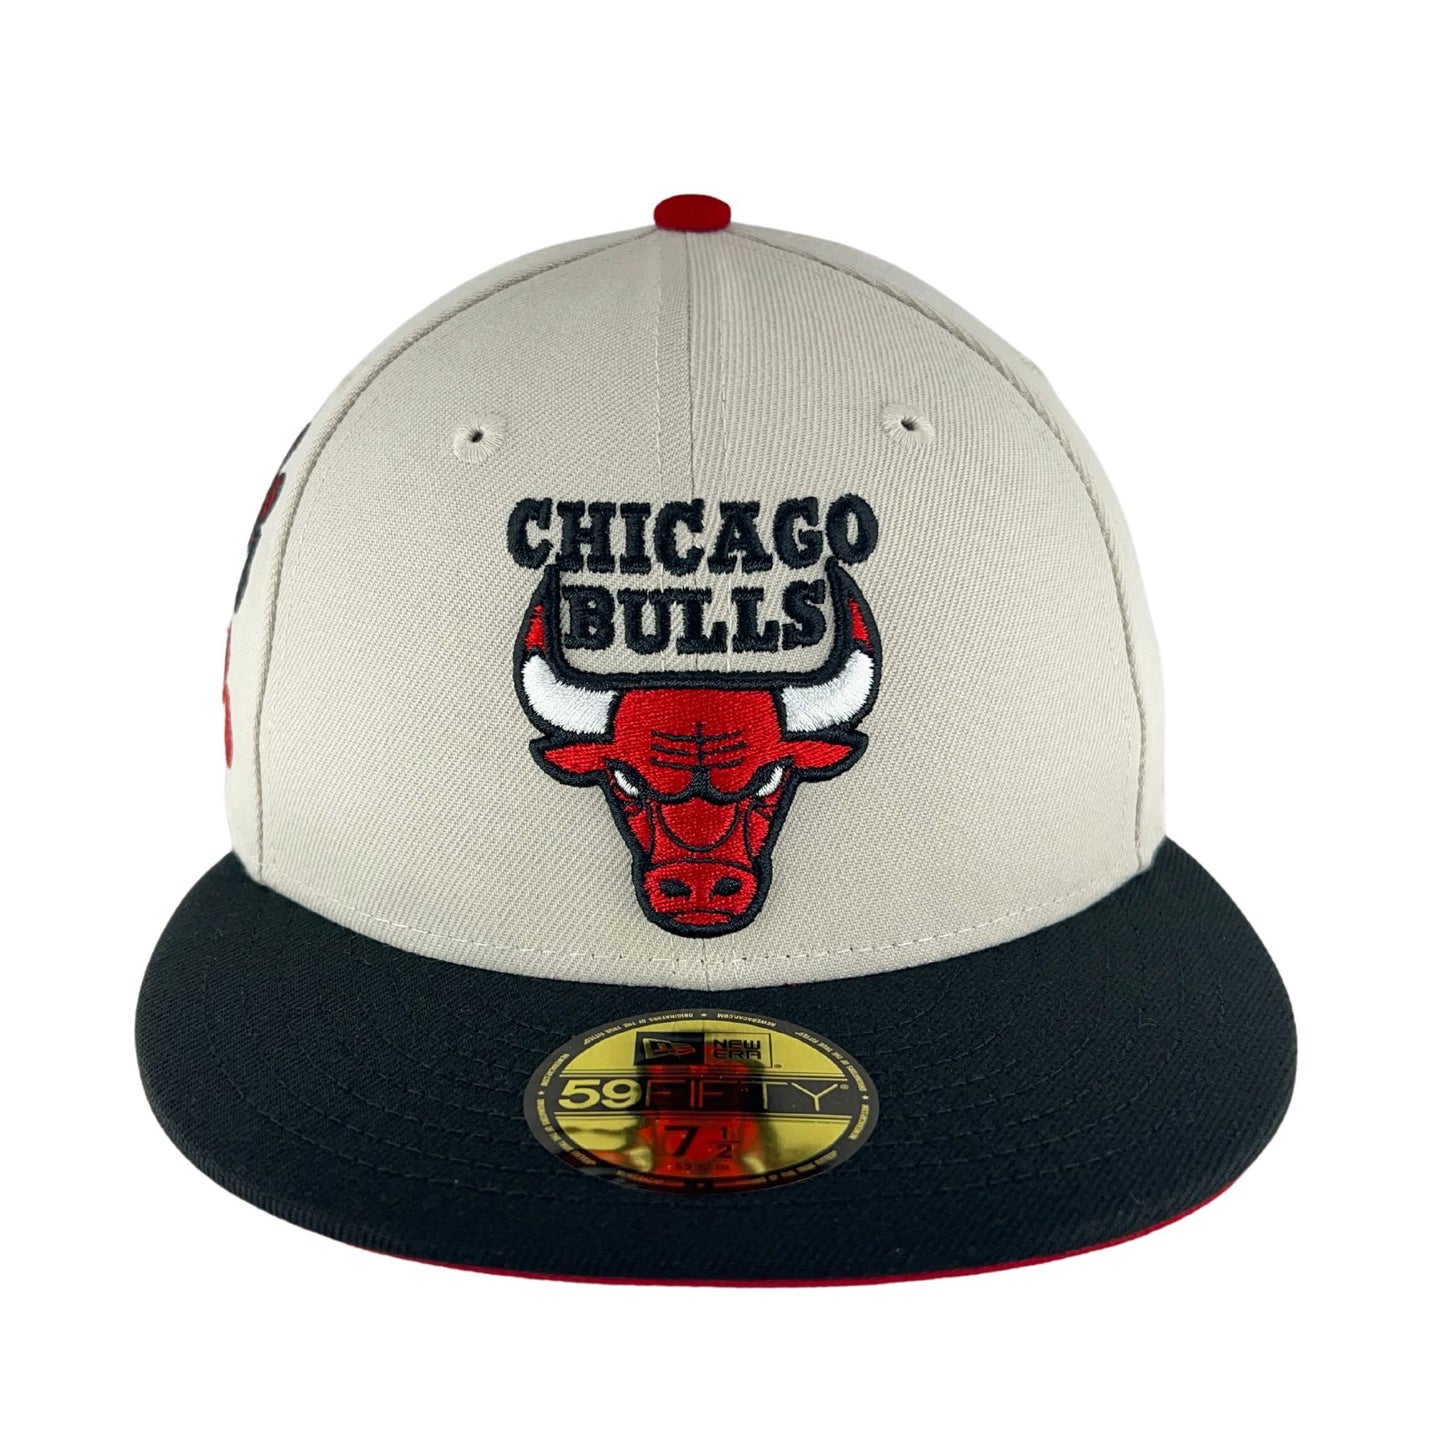 Chicago Bulls Stone/Black/Red UV New Era 59FIFTY Fitted Hat